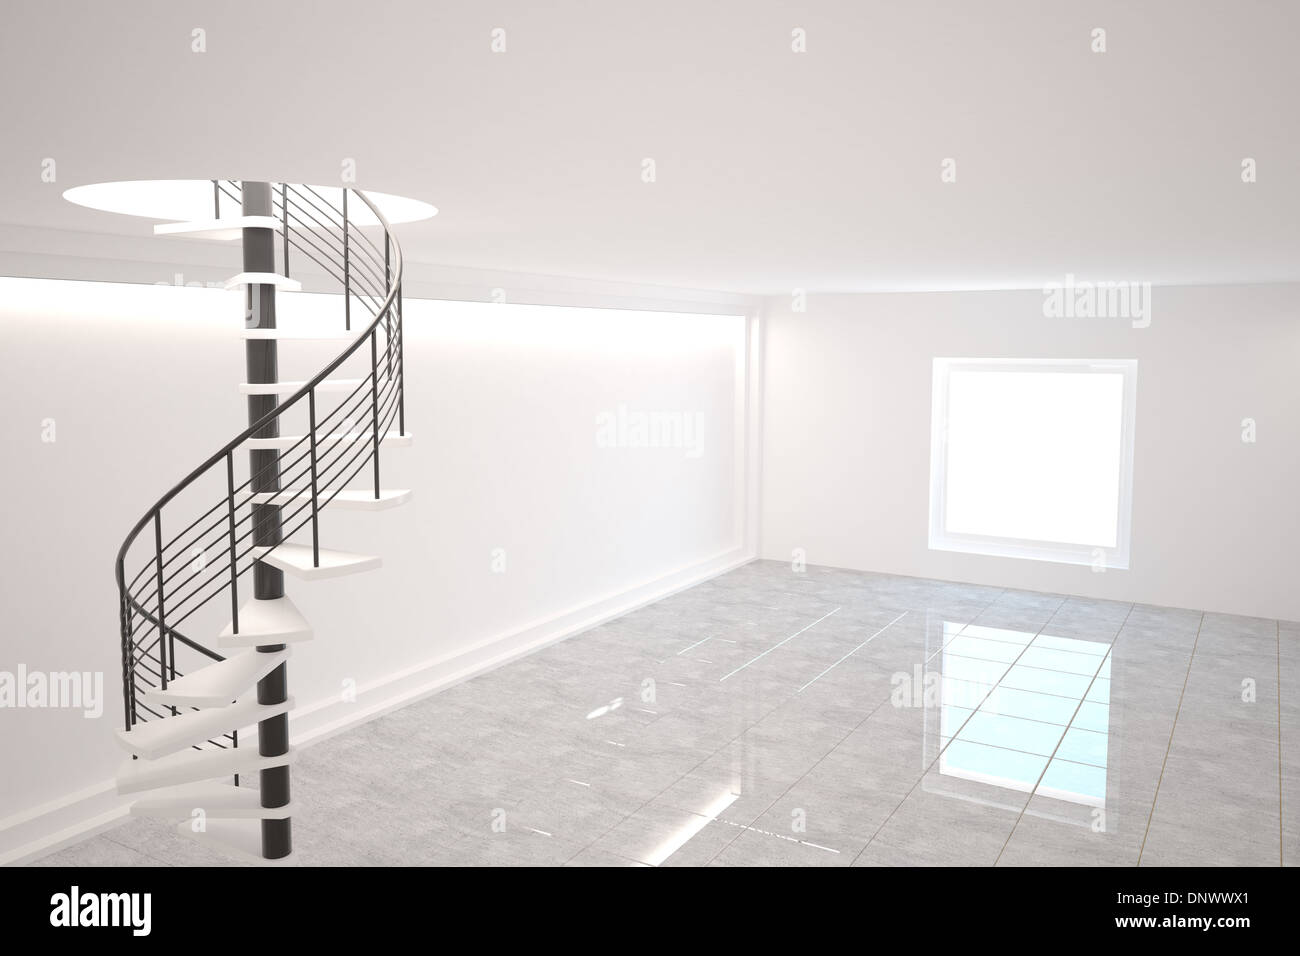 Digitally generated room with winding stairs Stock Photo